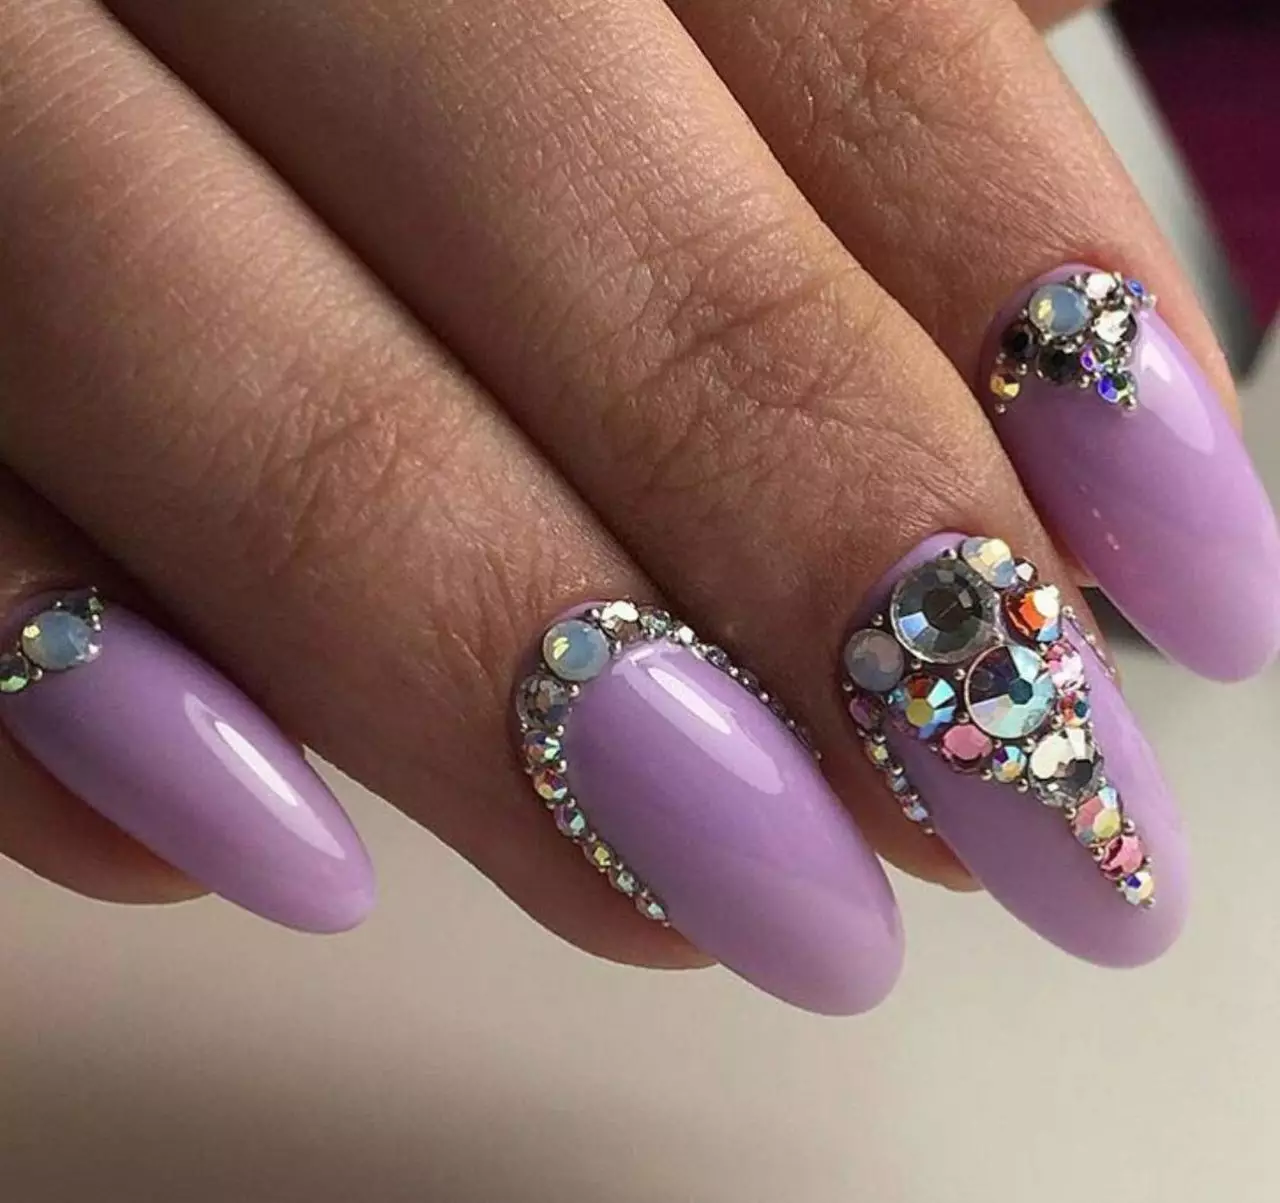 Design of lilac nails (63 photos): Ideas for a lilac color manicure with sparkles, rhinestones and pattern 17252_48